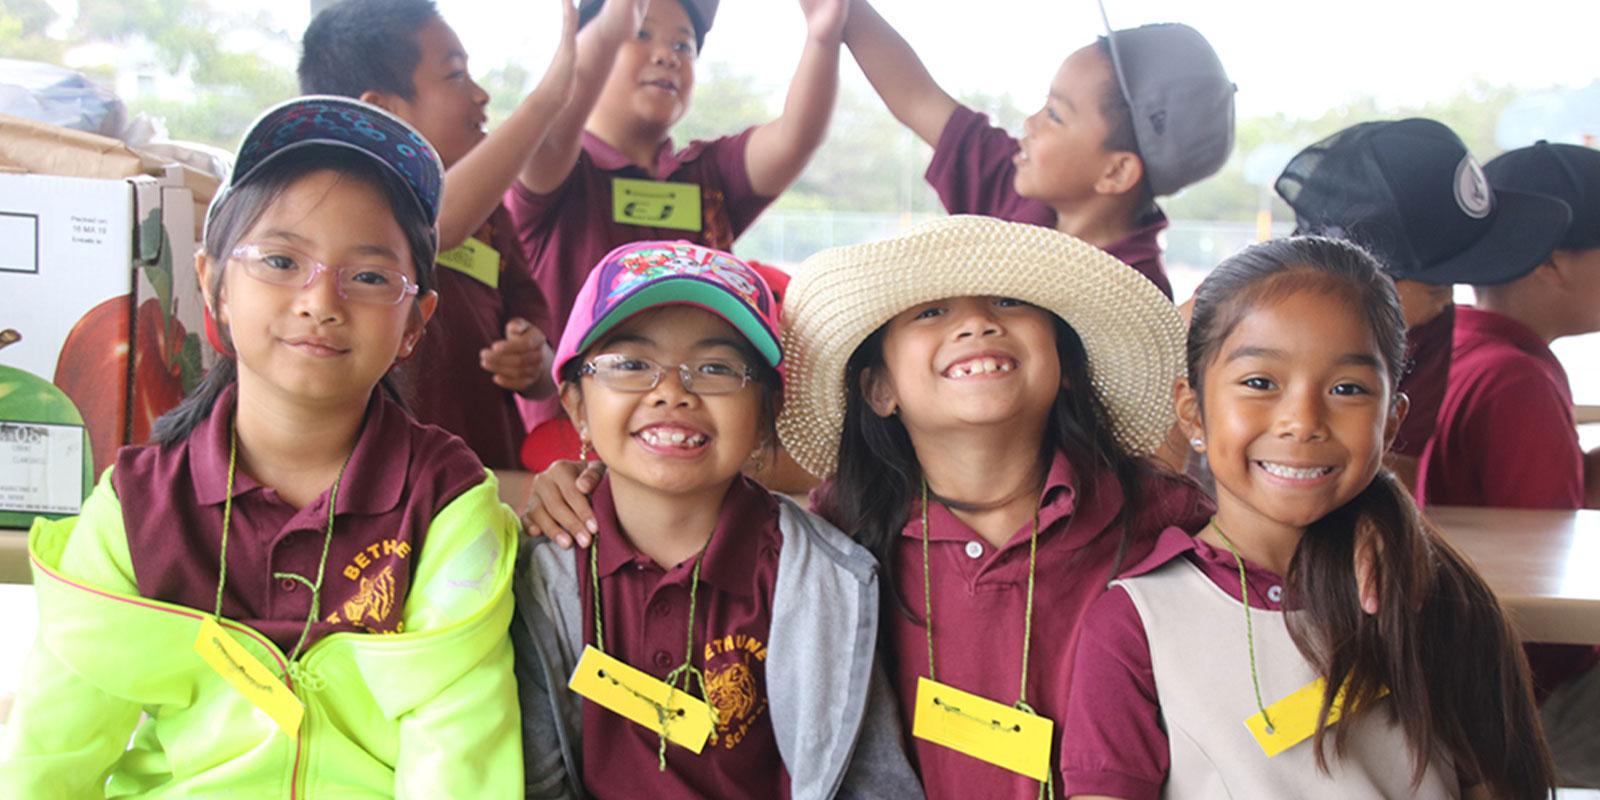 Four elementary school girls in maroon shirts leaning on each other and smiling at the camera